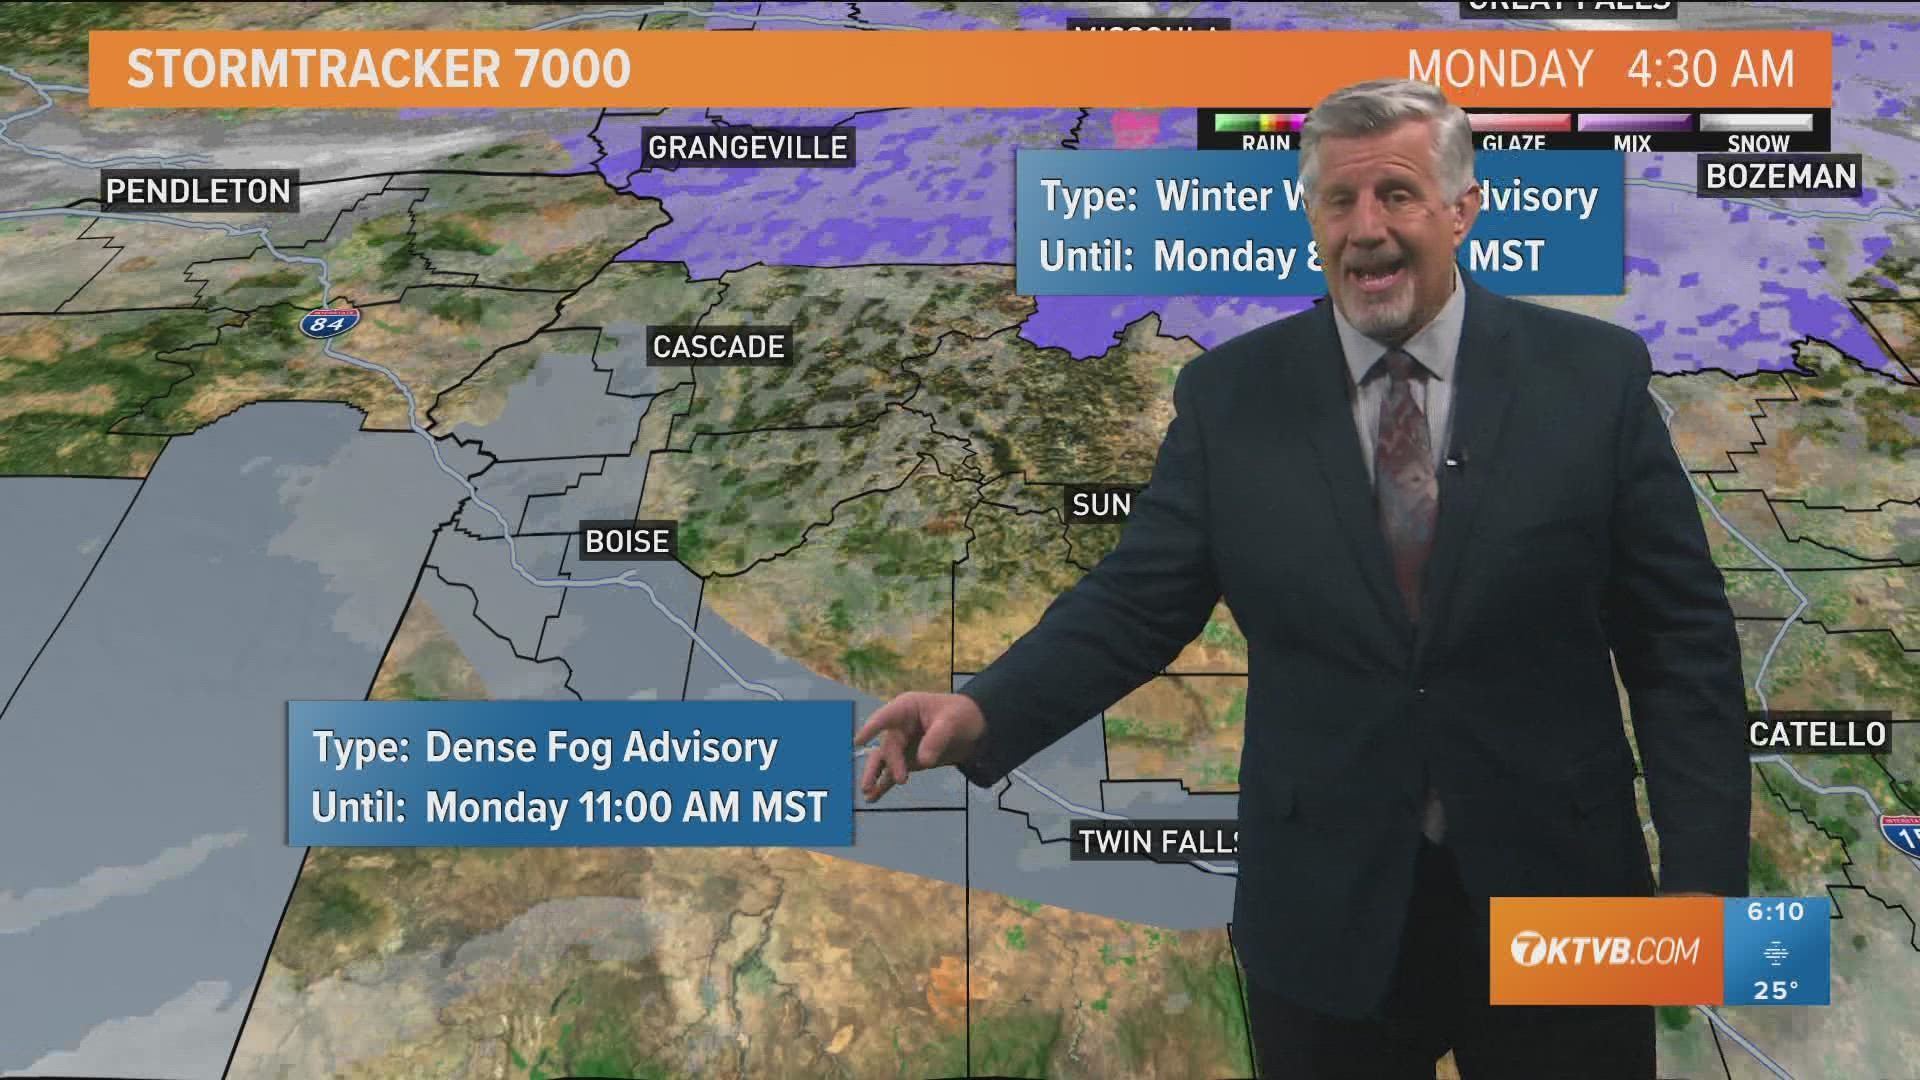 KTVB First Alert Weather Monday, Dec. 5, 2022, with meteorologist Jim Duthie in Boise, Idaho.